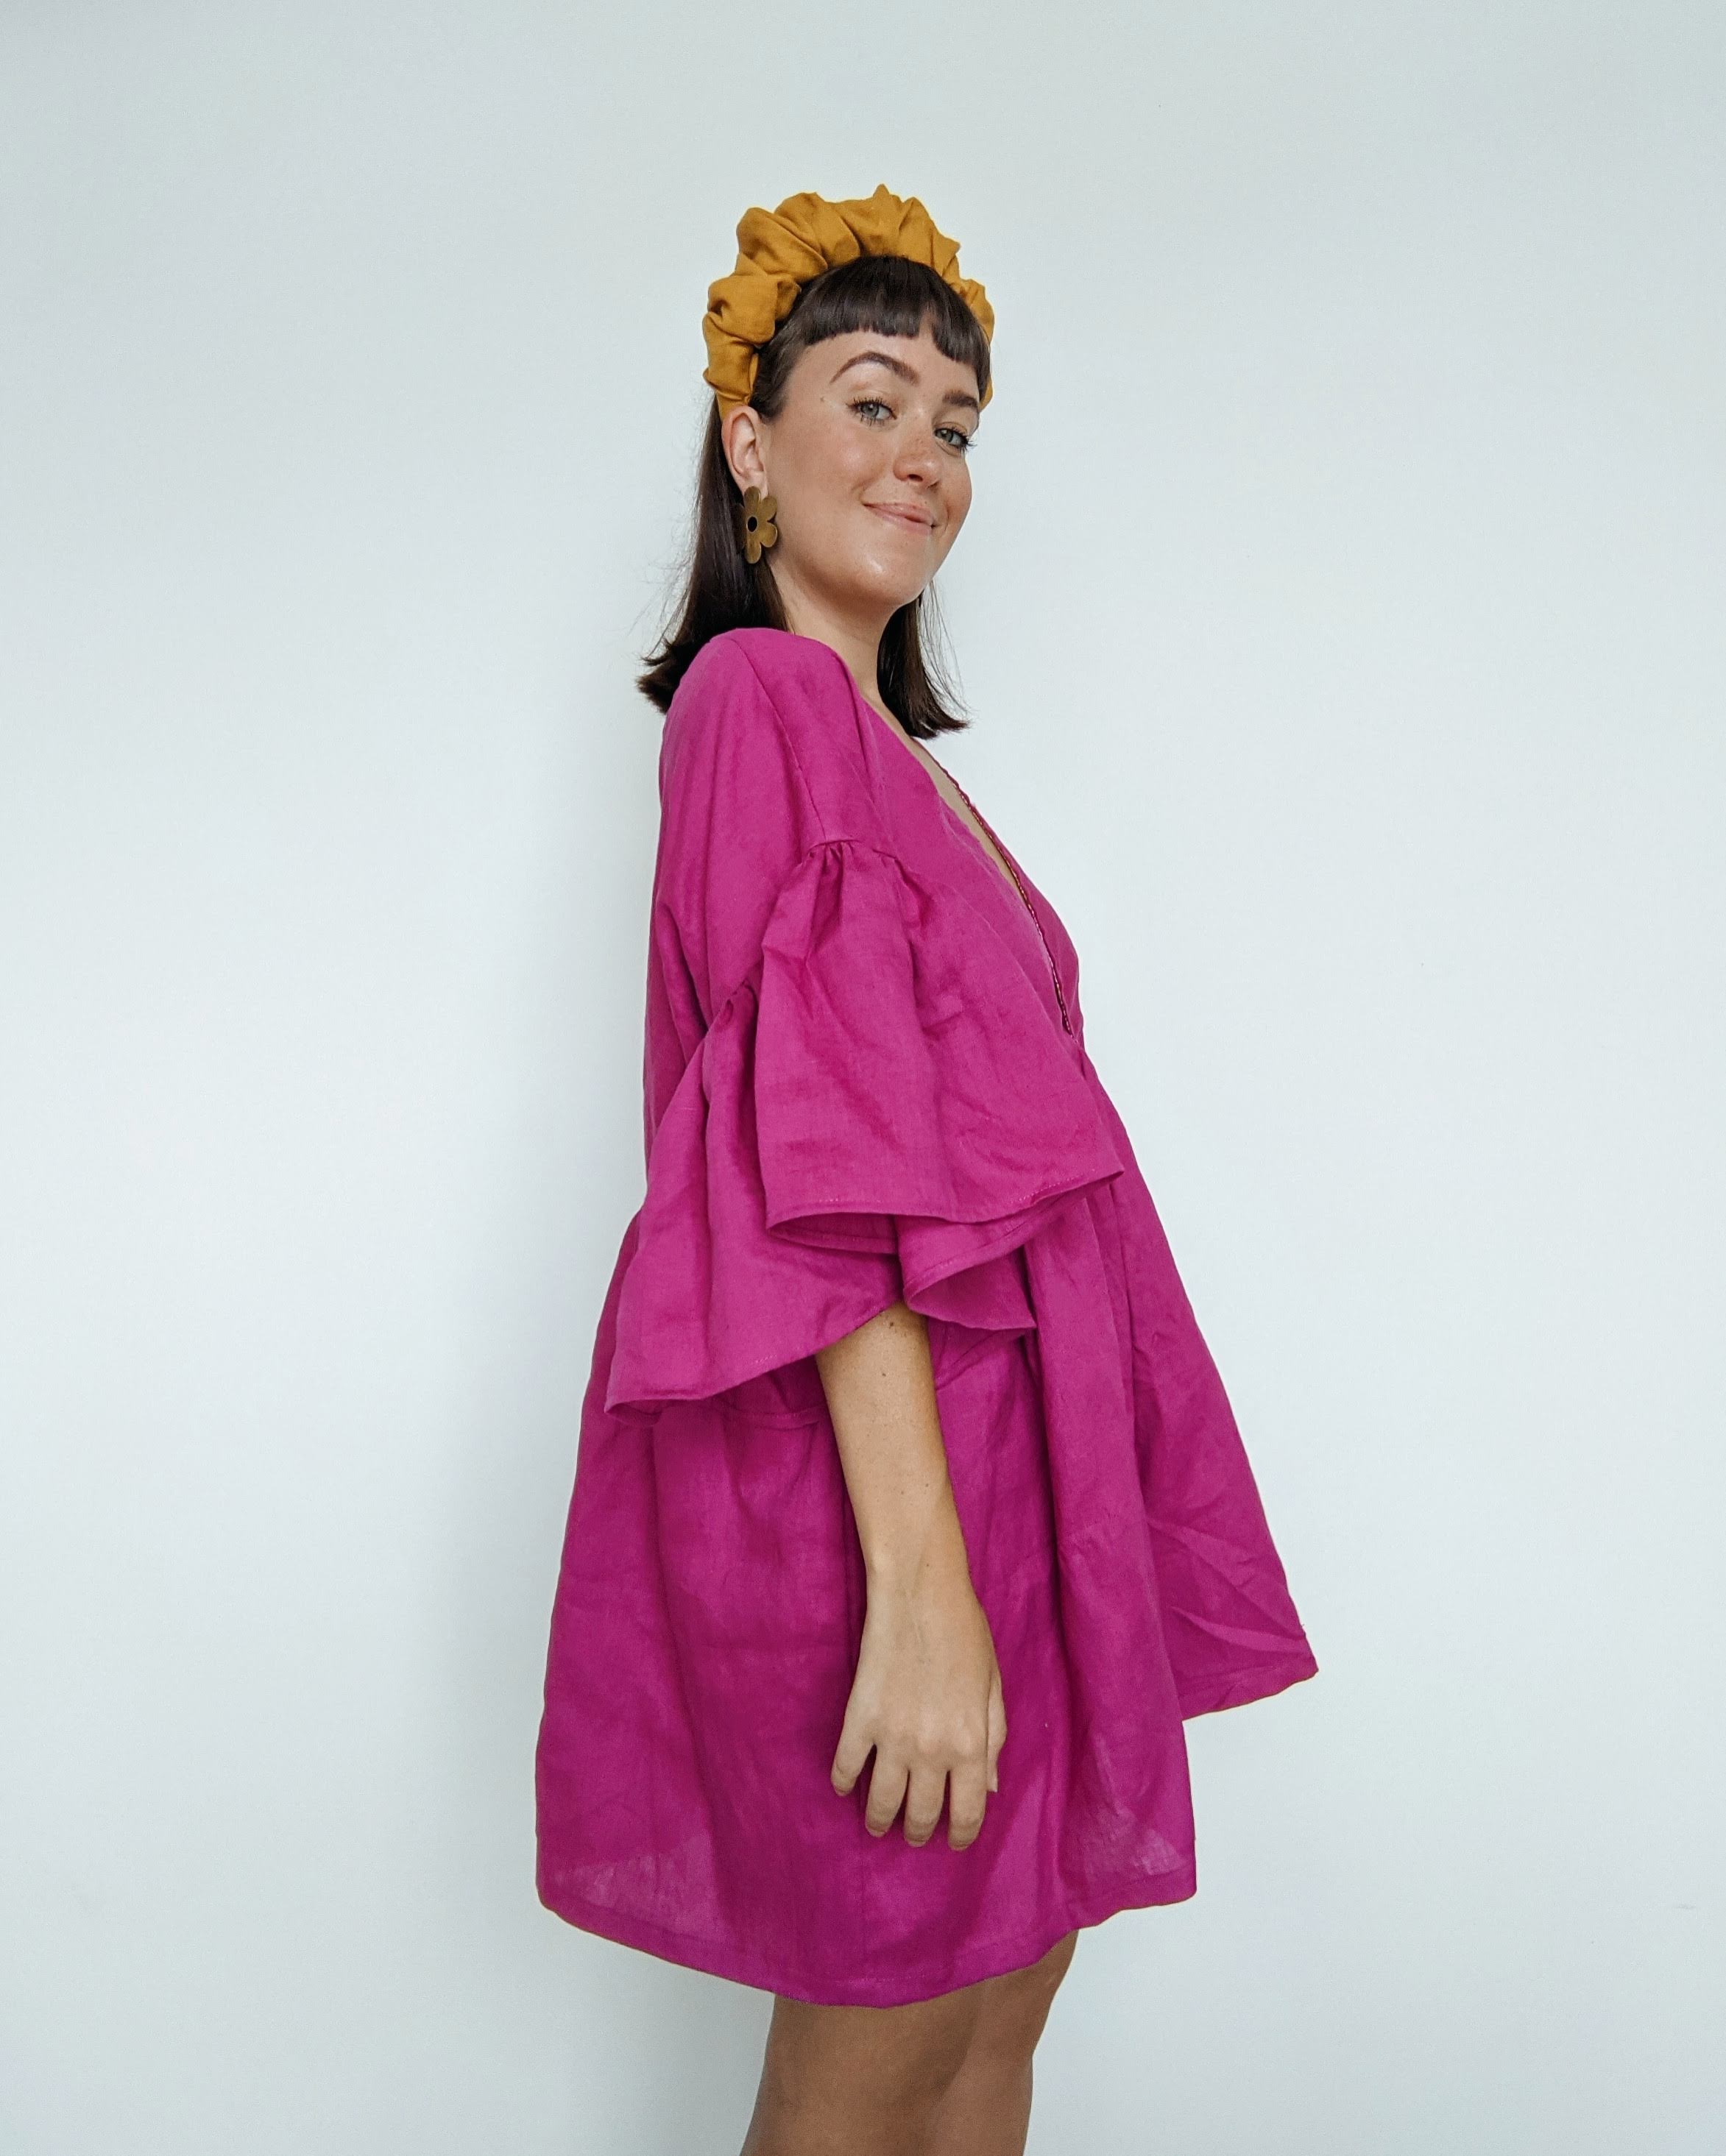 Daisy stands side on smiling towards the camera.  She is wearing a magenta pink linen dress with a golden linen headband.